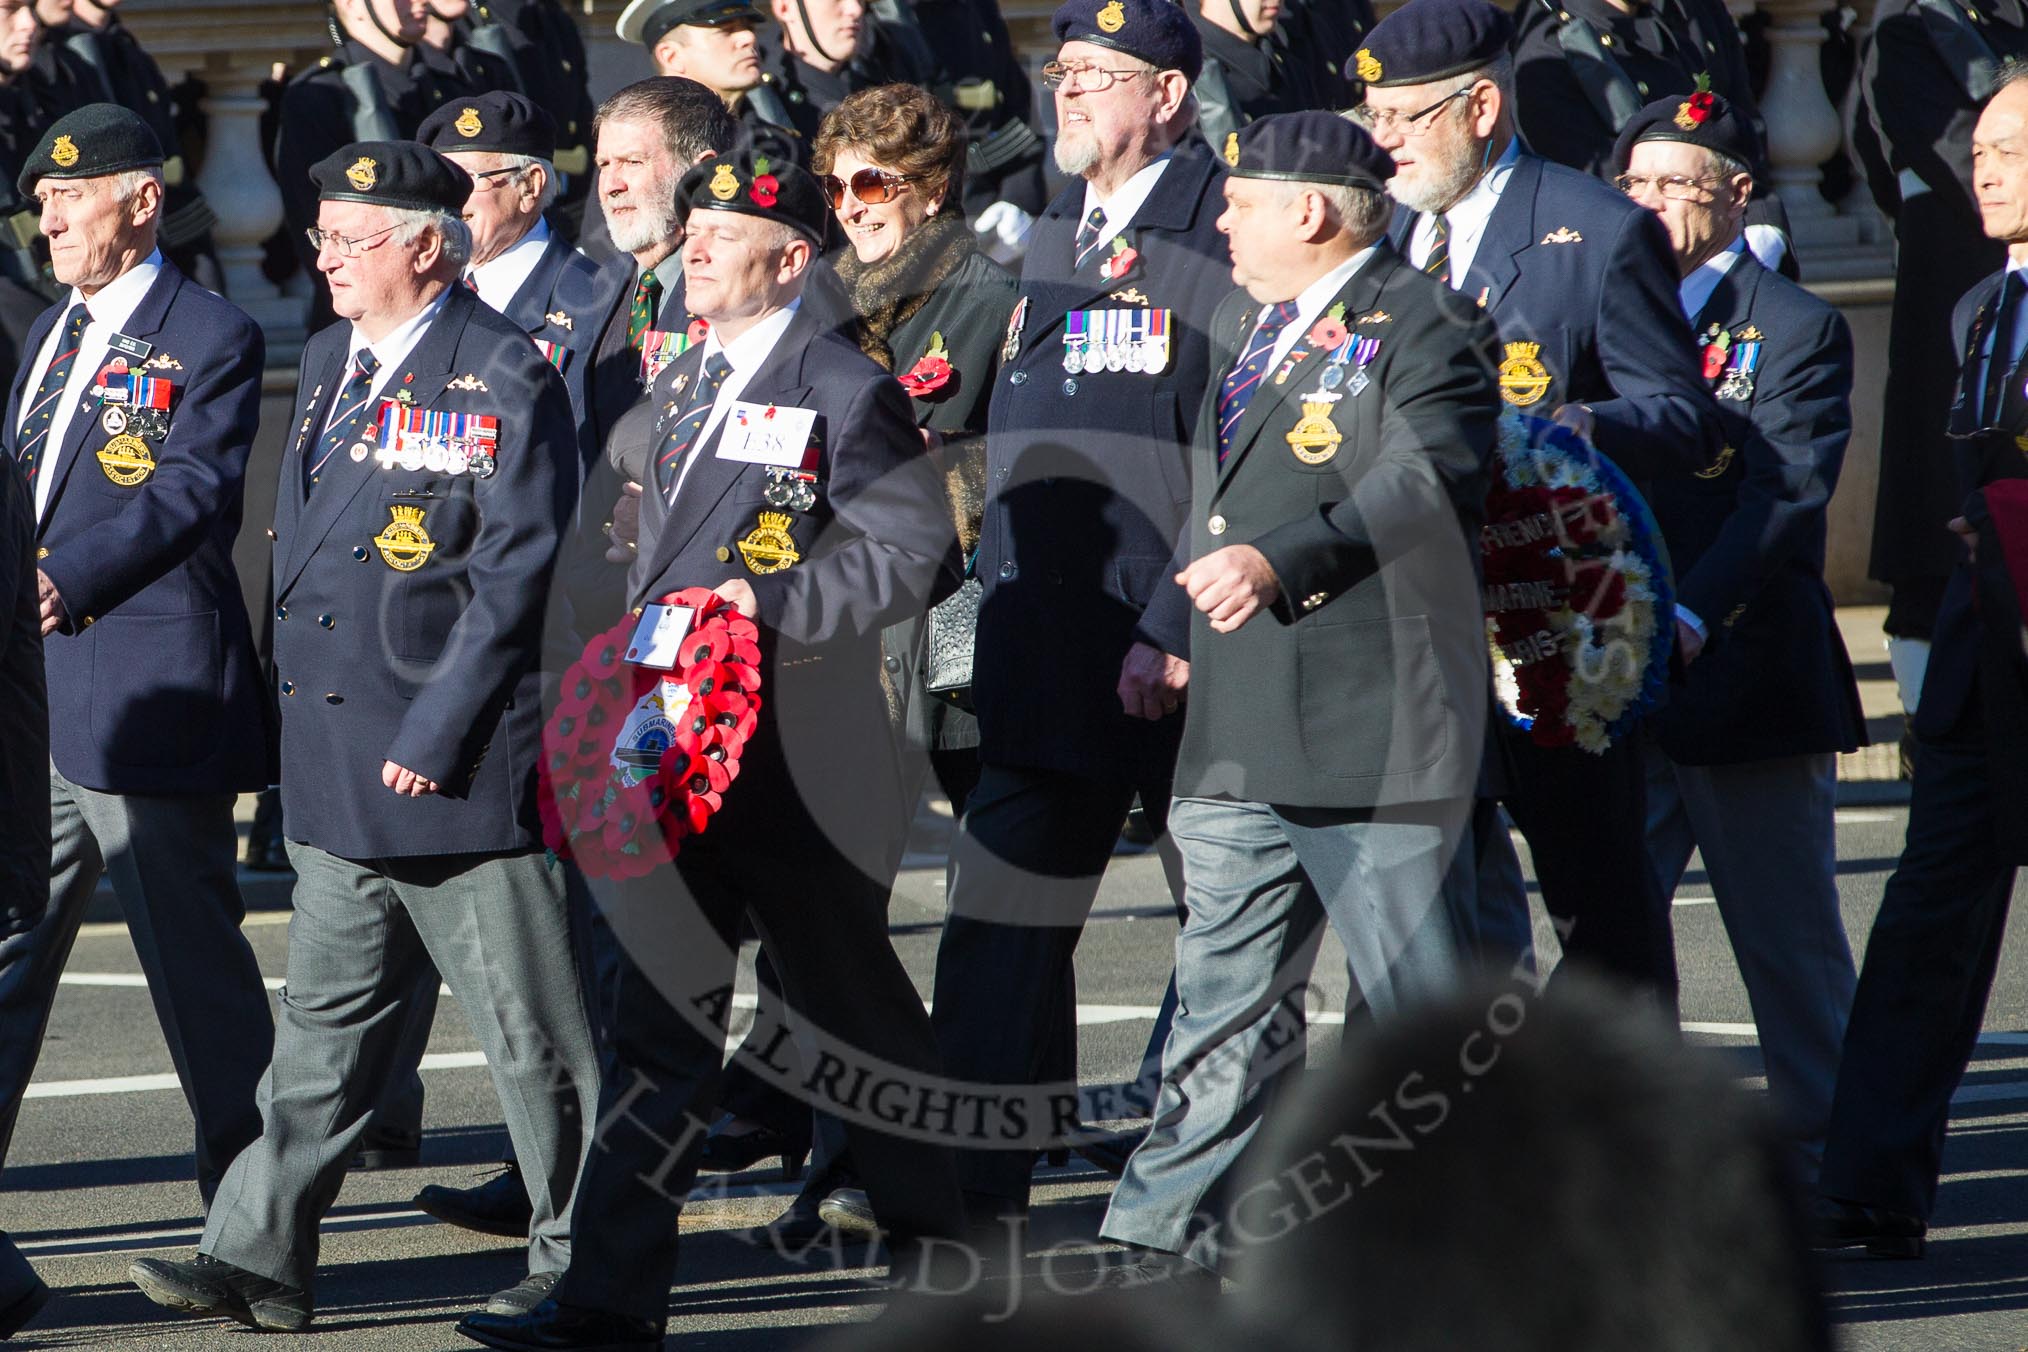 Remembrance Sunday 2012 Cenotaph March Past: Group E38 - Submariners Association..
Whitehall, Cenotaph,
London SW1,

United Kingdom,
on 11 November 2012 at 11:42, image #274